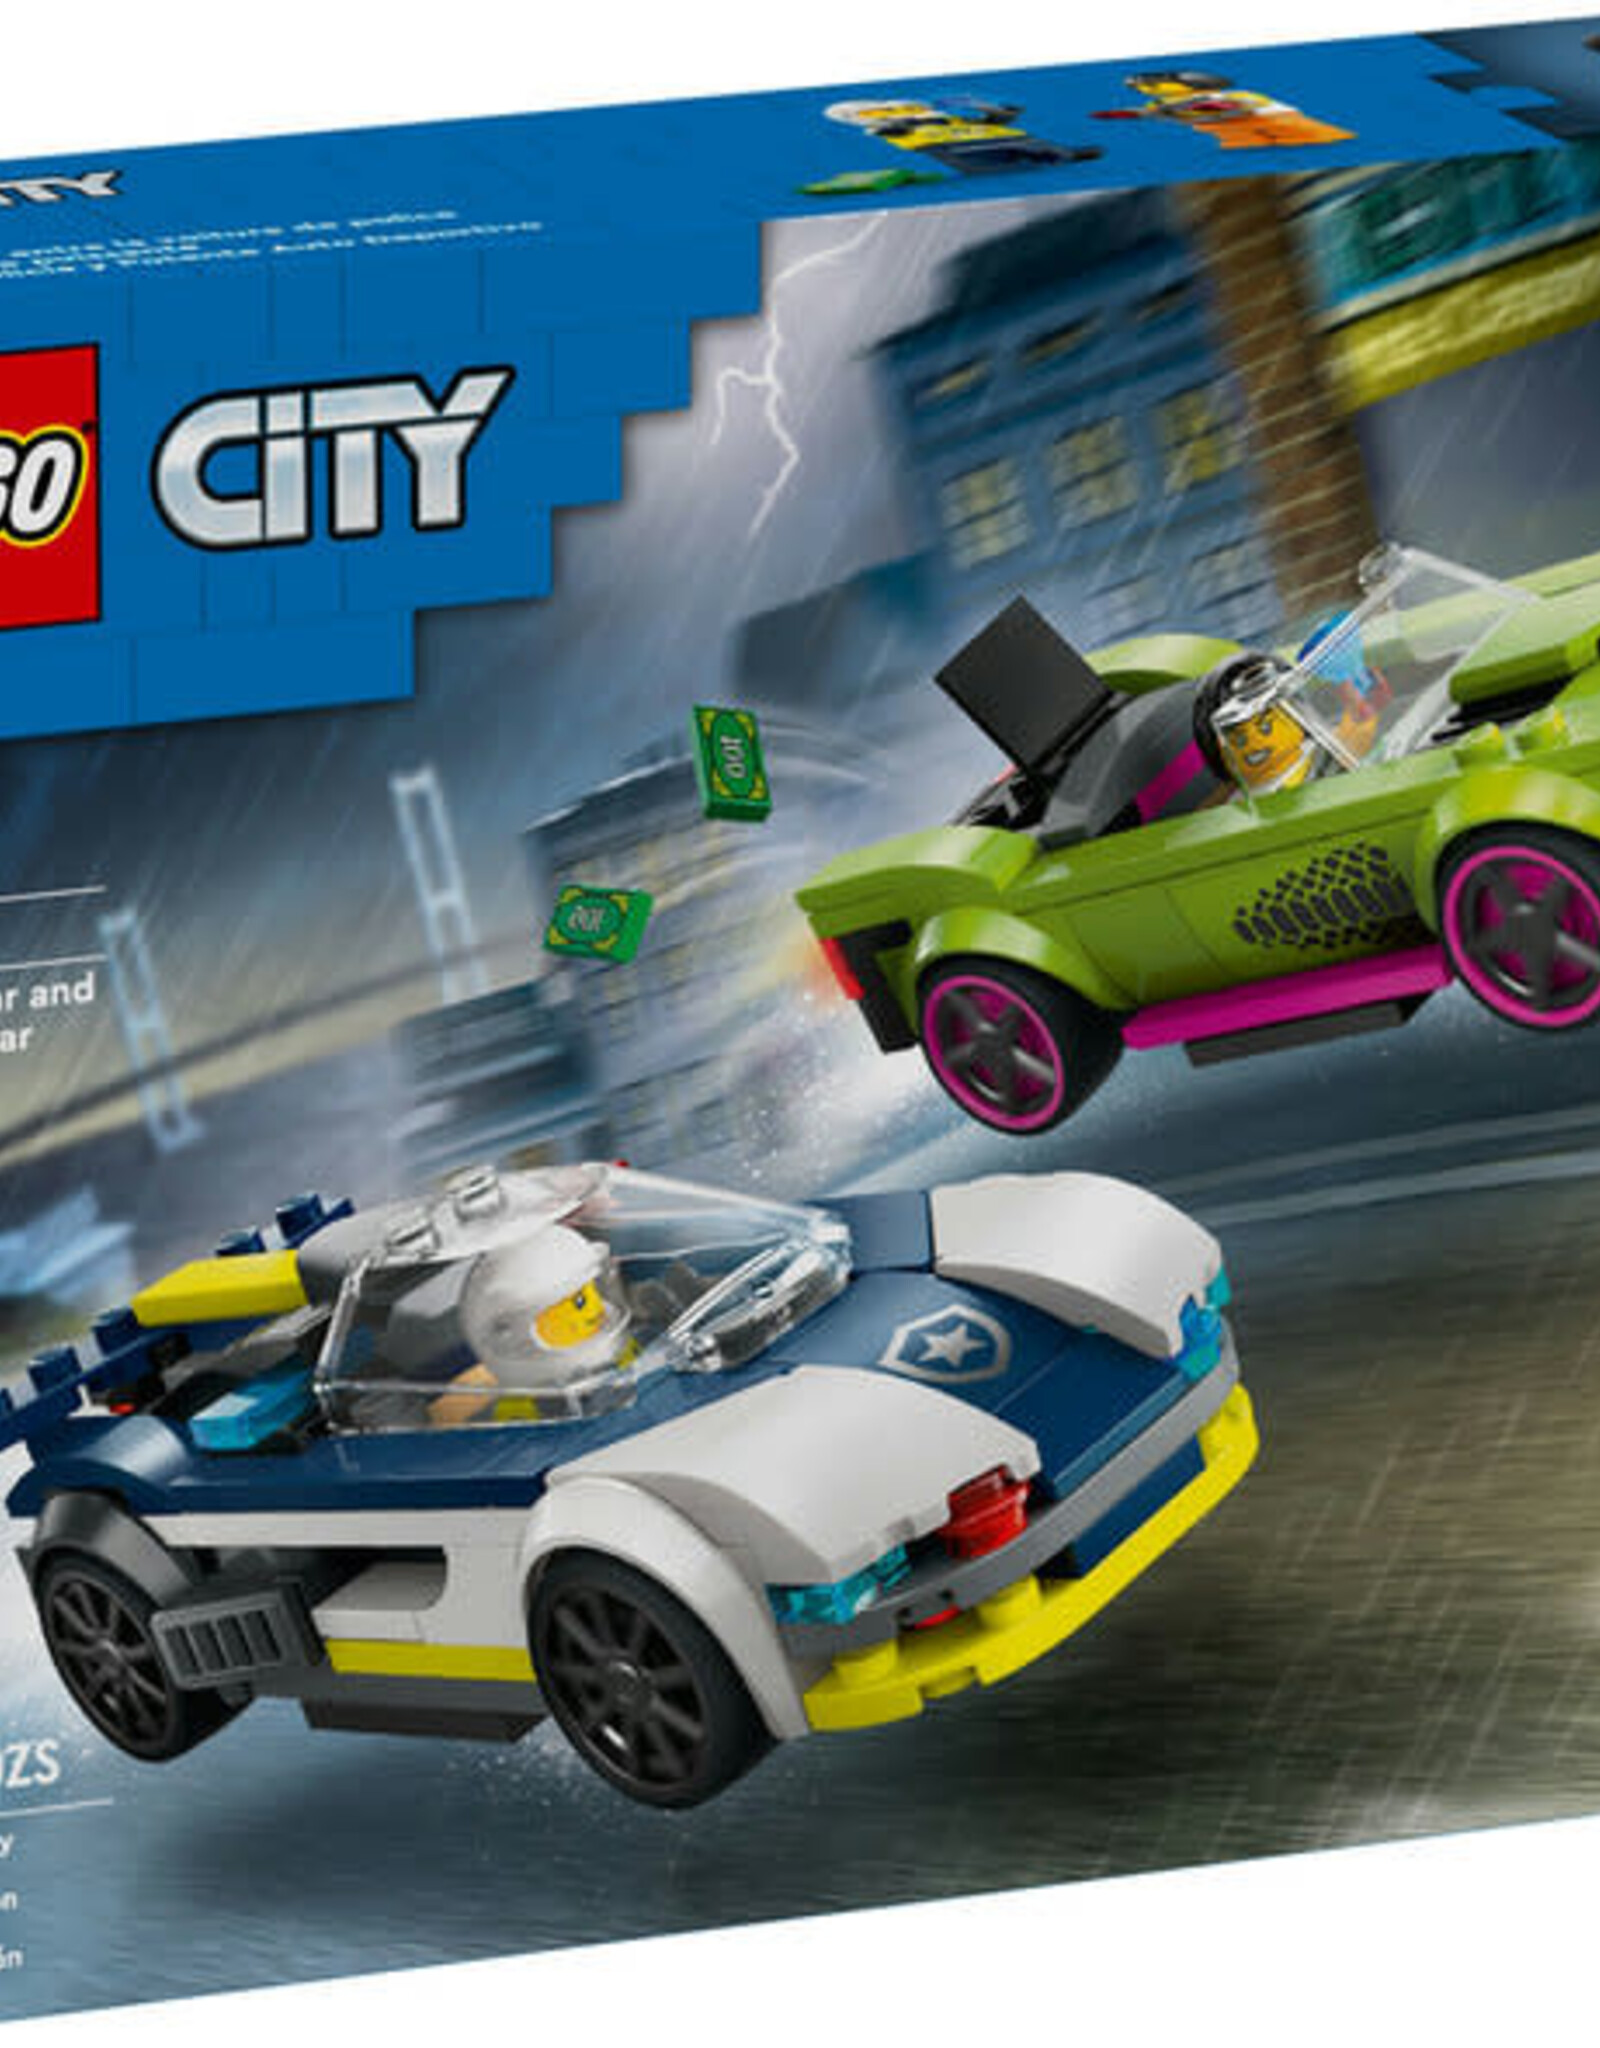 Lego Police Car and Muscle Car Chase